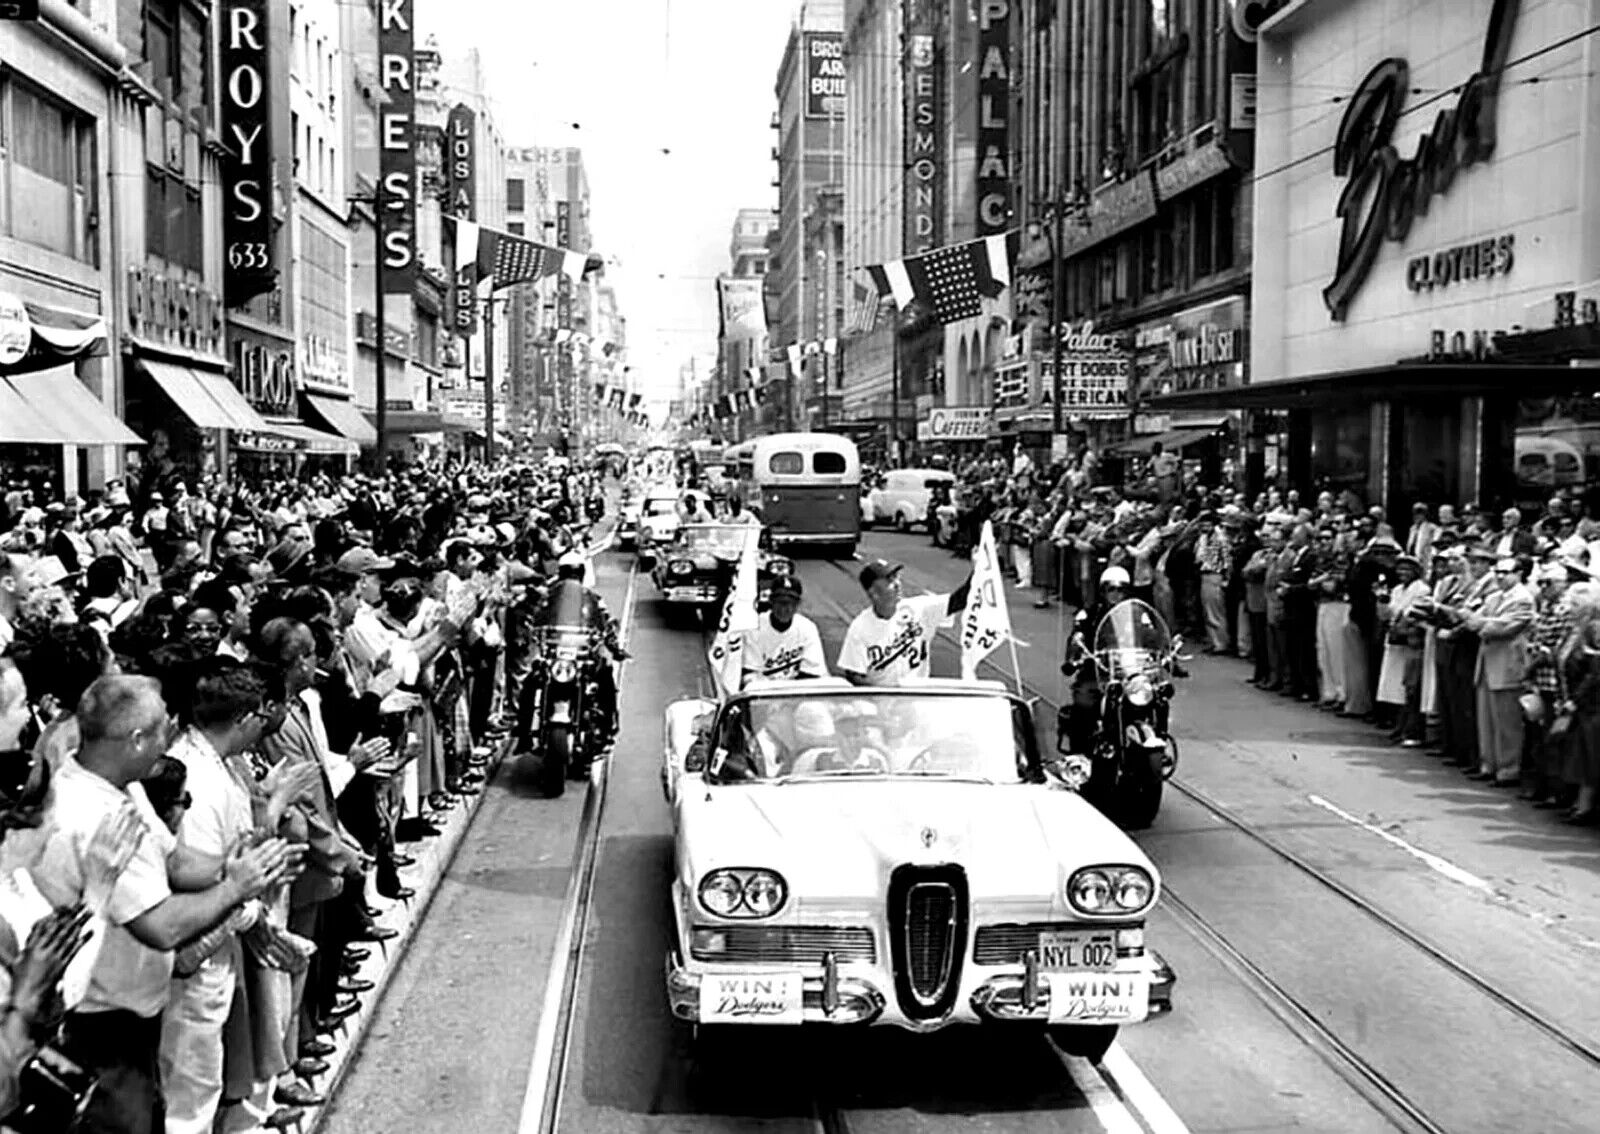 1958 DODGERS Arrival in Los Angeles PARADE Retro Baseball Picture Photo 4x6